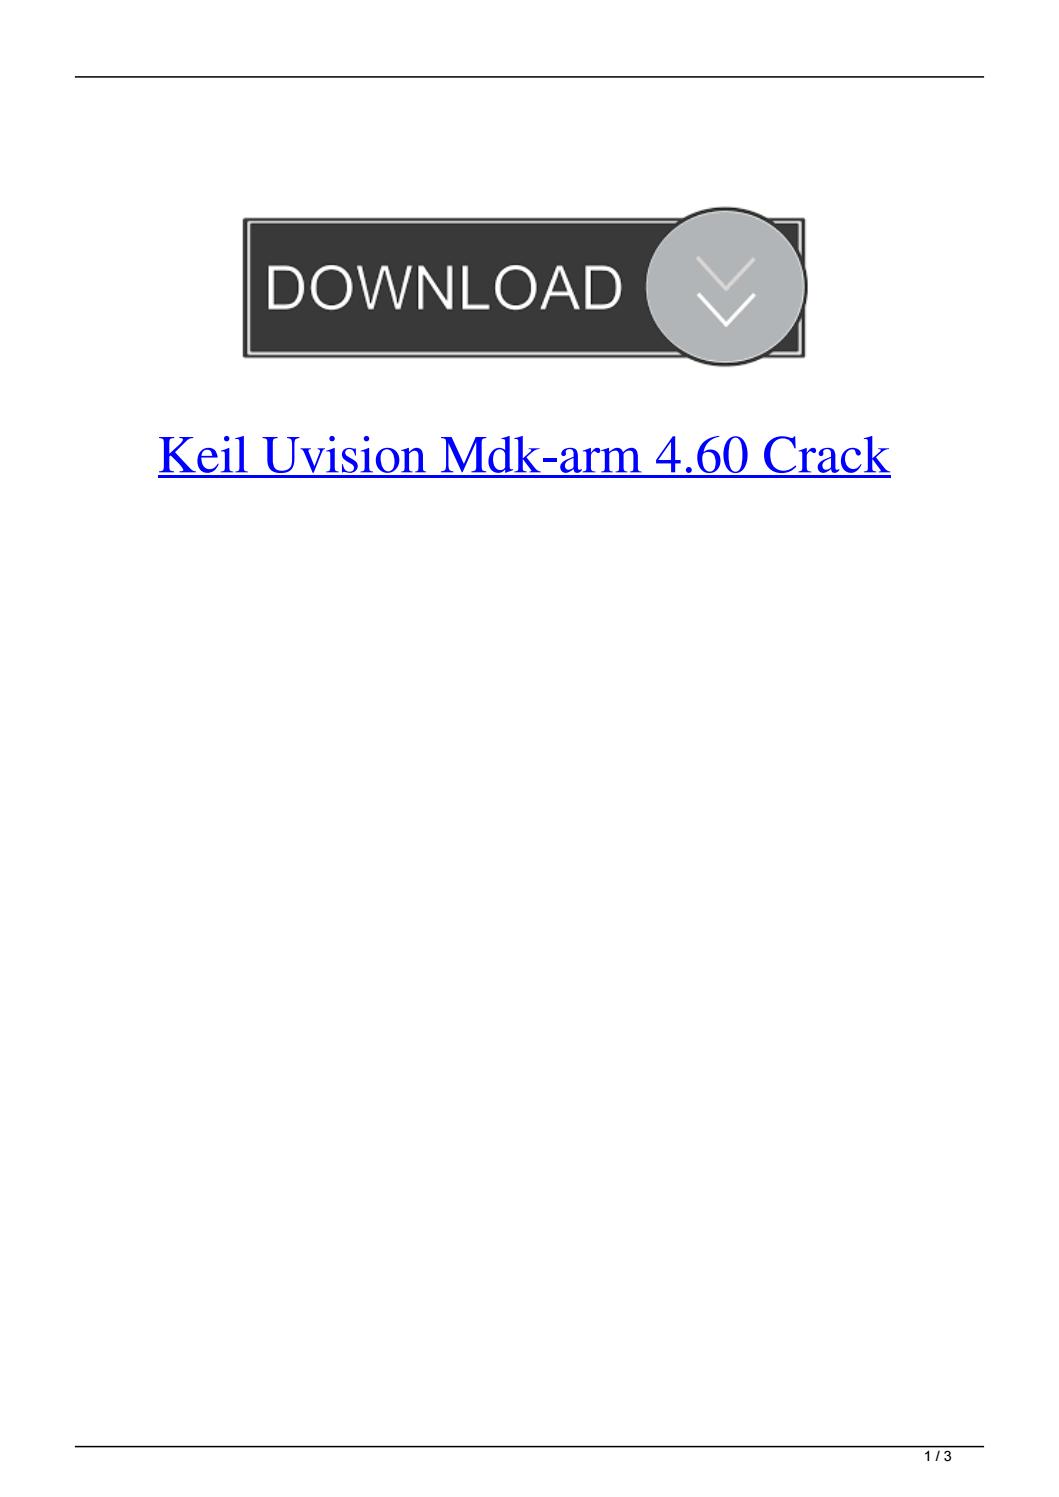 Keil uvision 5 download free